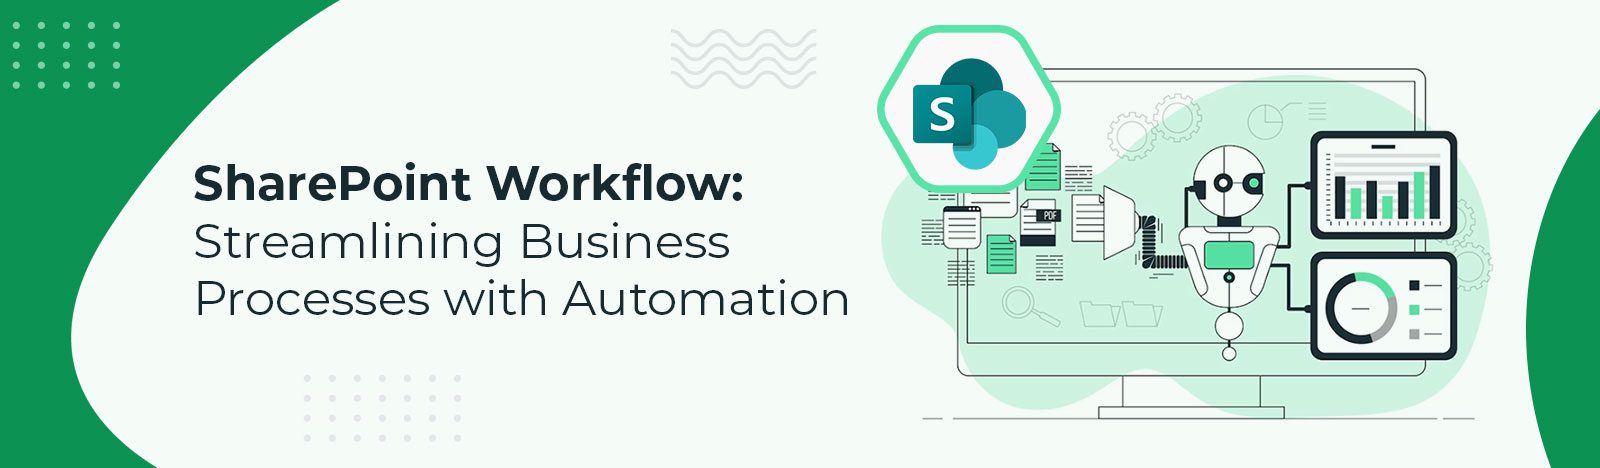 SharePoint Workflows: Streamlining Business Processes with Automation